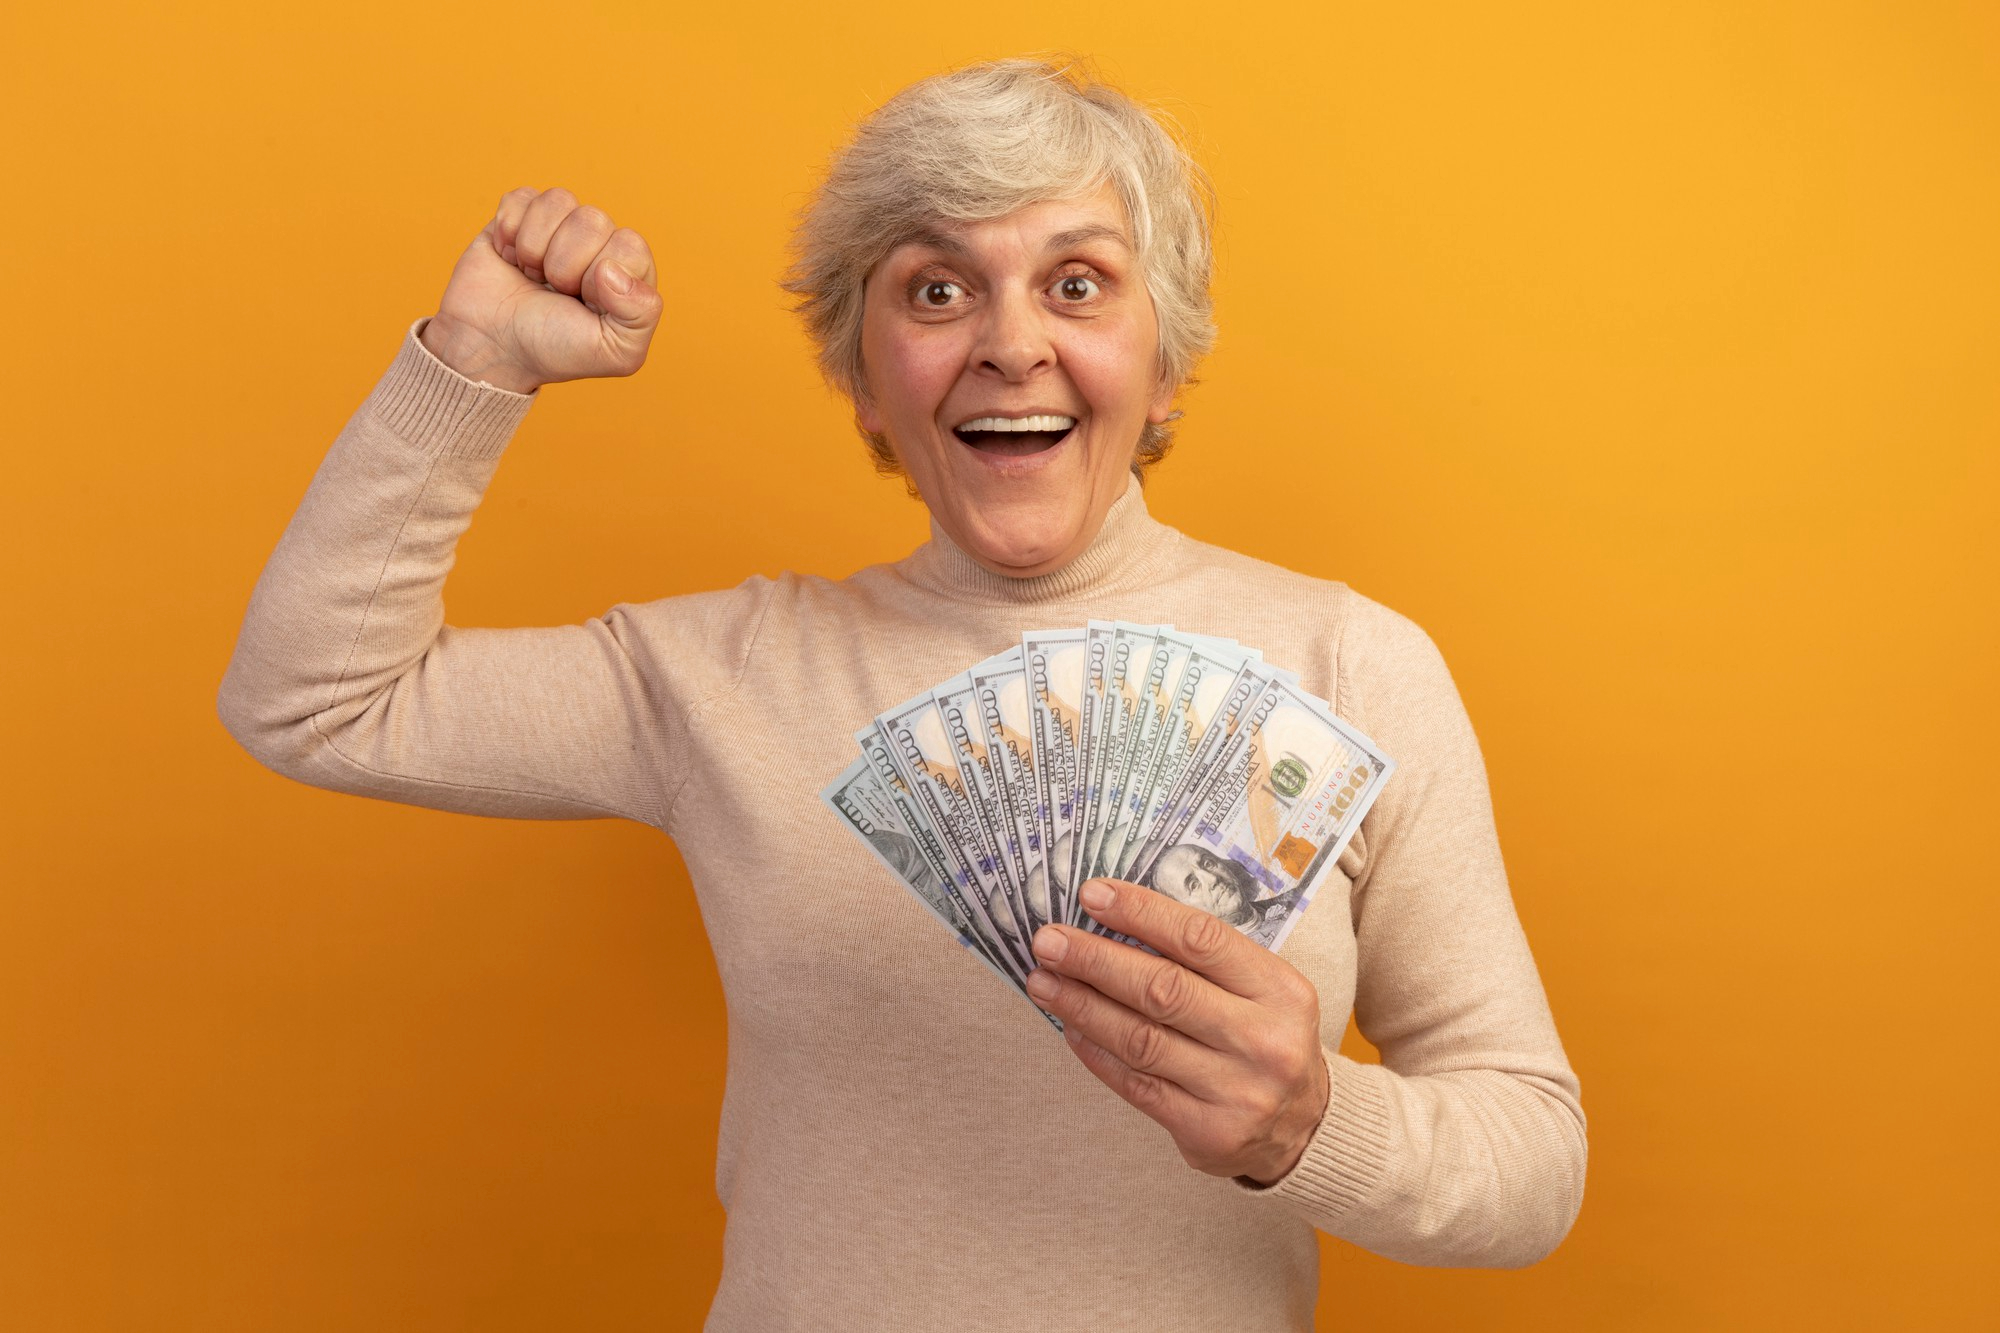 A middle-aged woman celebrating while holding money in one hand | Source: Freepik